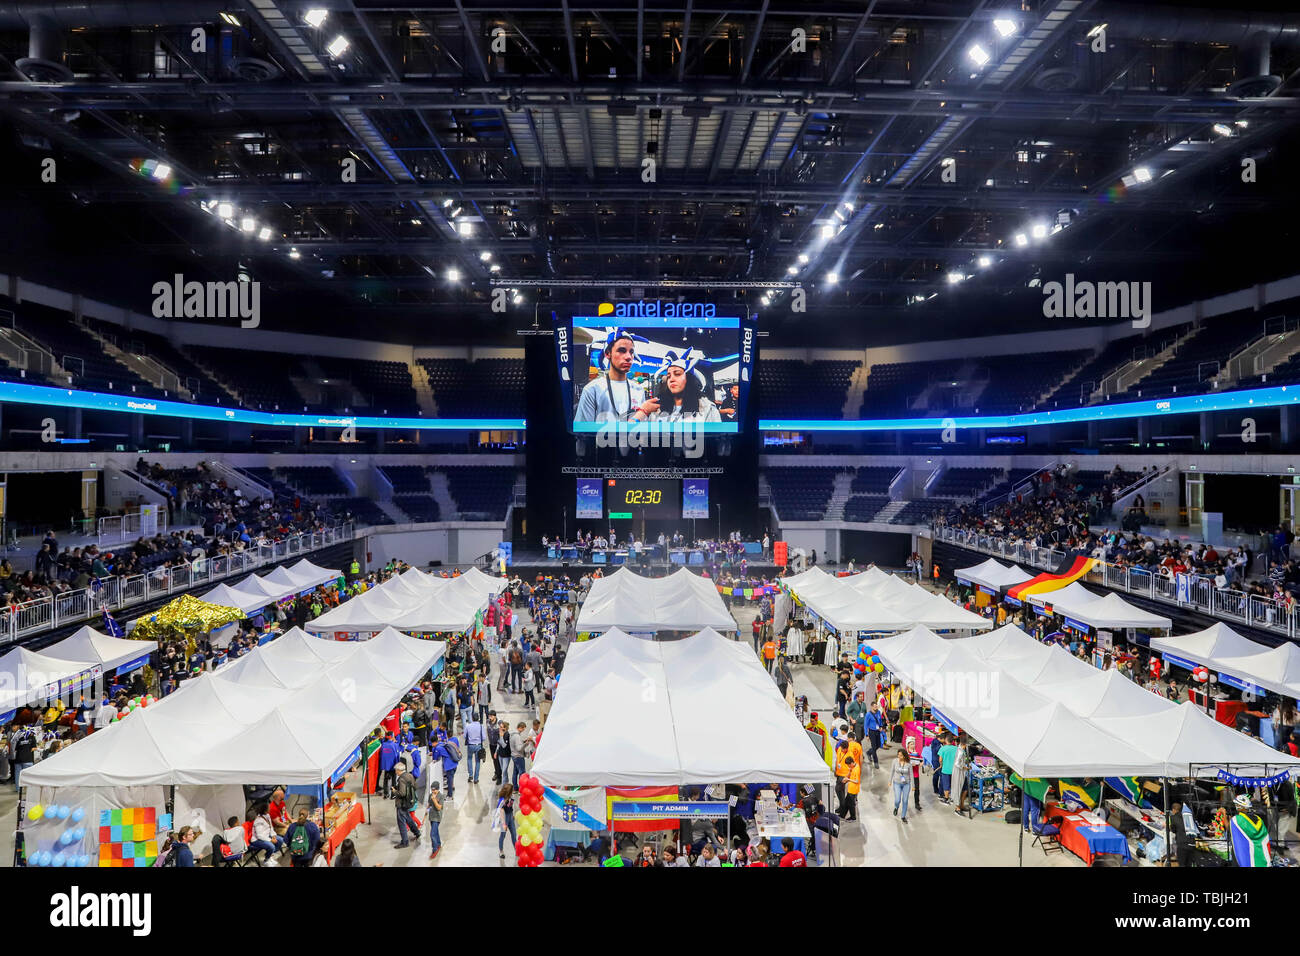 Montevideo, Uruguay. 01st June, 2019. A general view of the FIRST LEGO  league OPEN 2019 at the Antel Arena Stadium. For the first time, Uruguay  hosted the FIRST LEGO League OPEN 2019